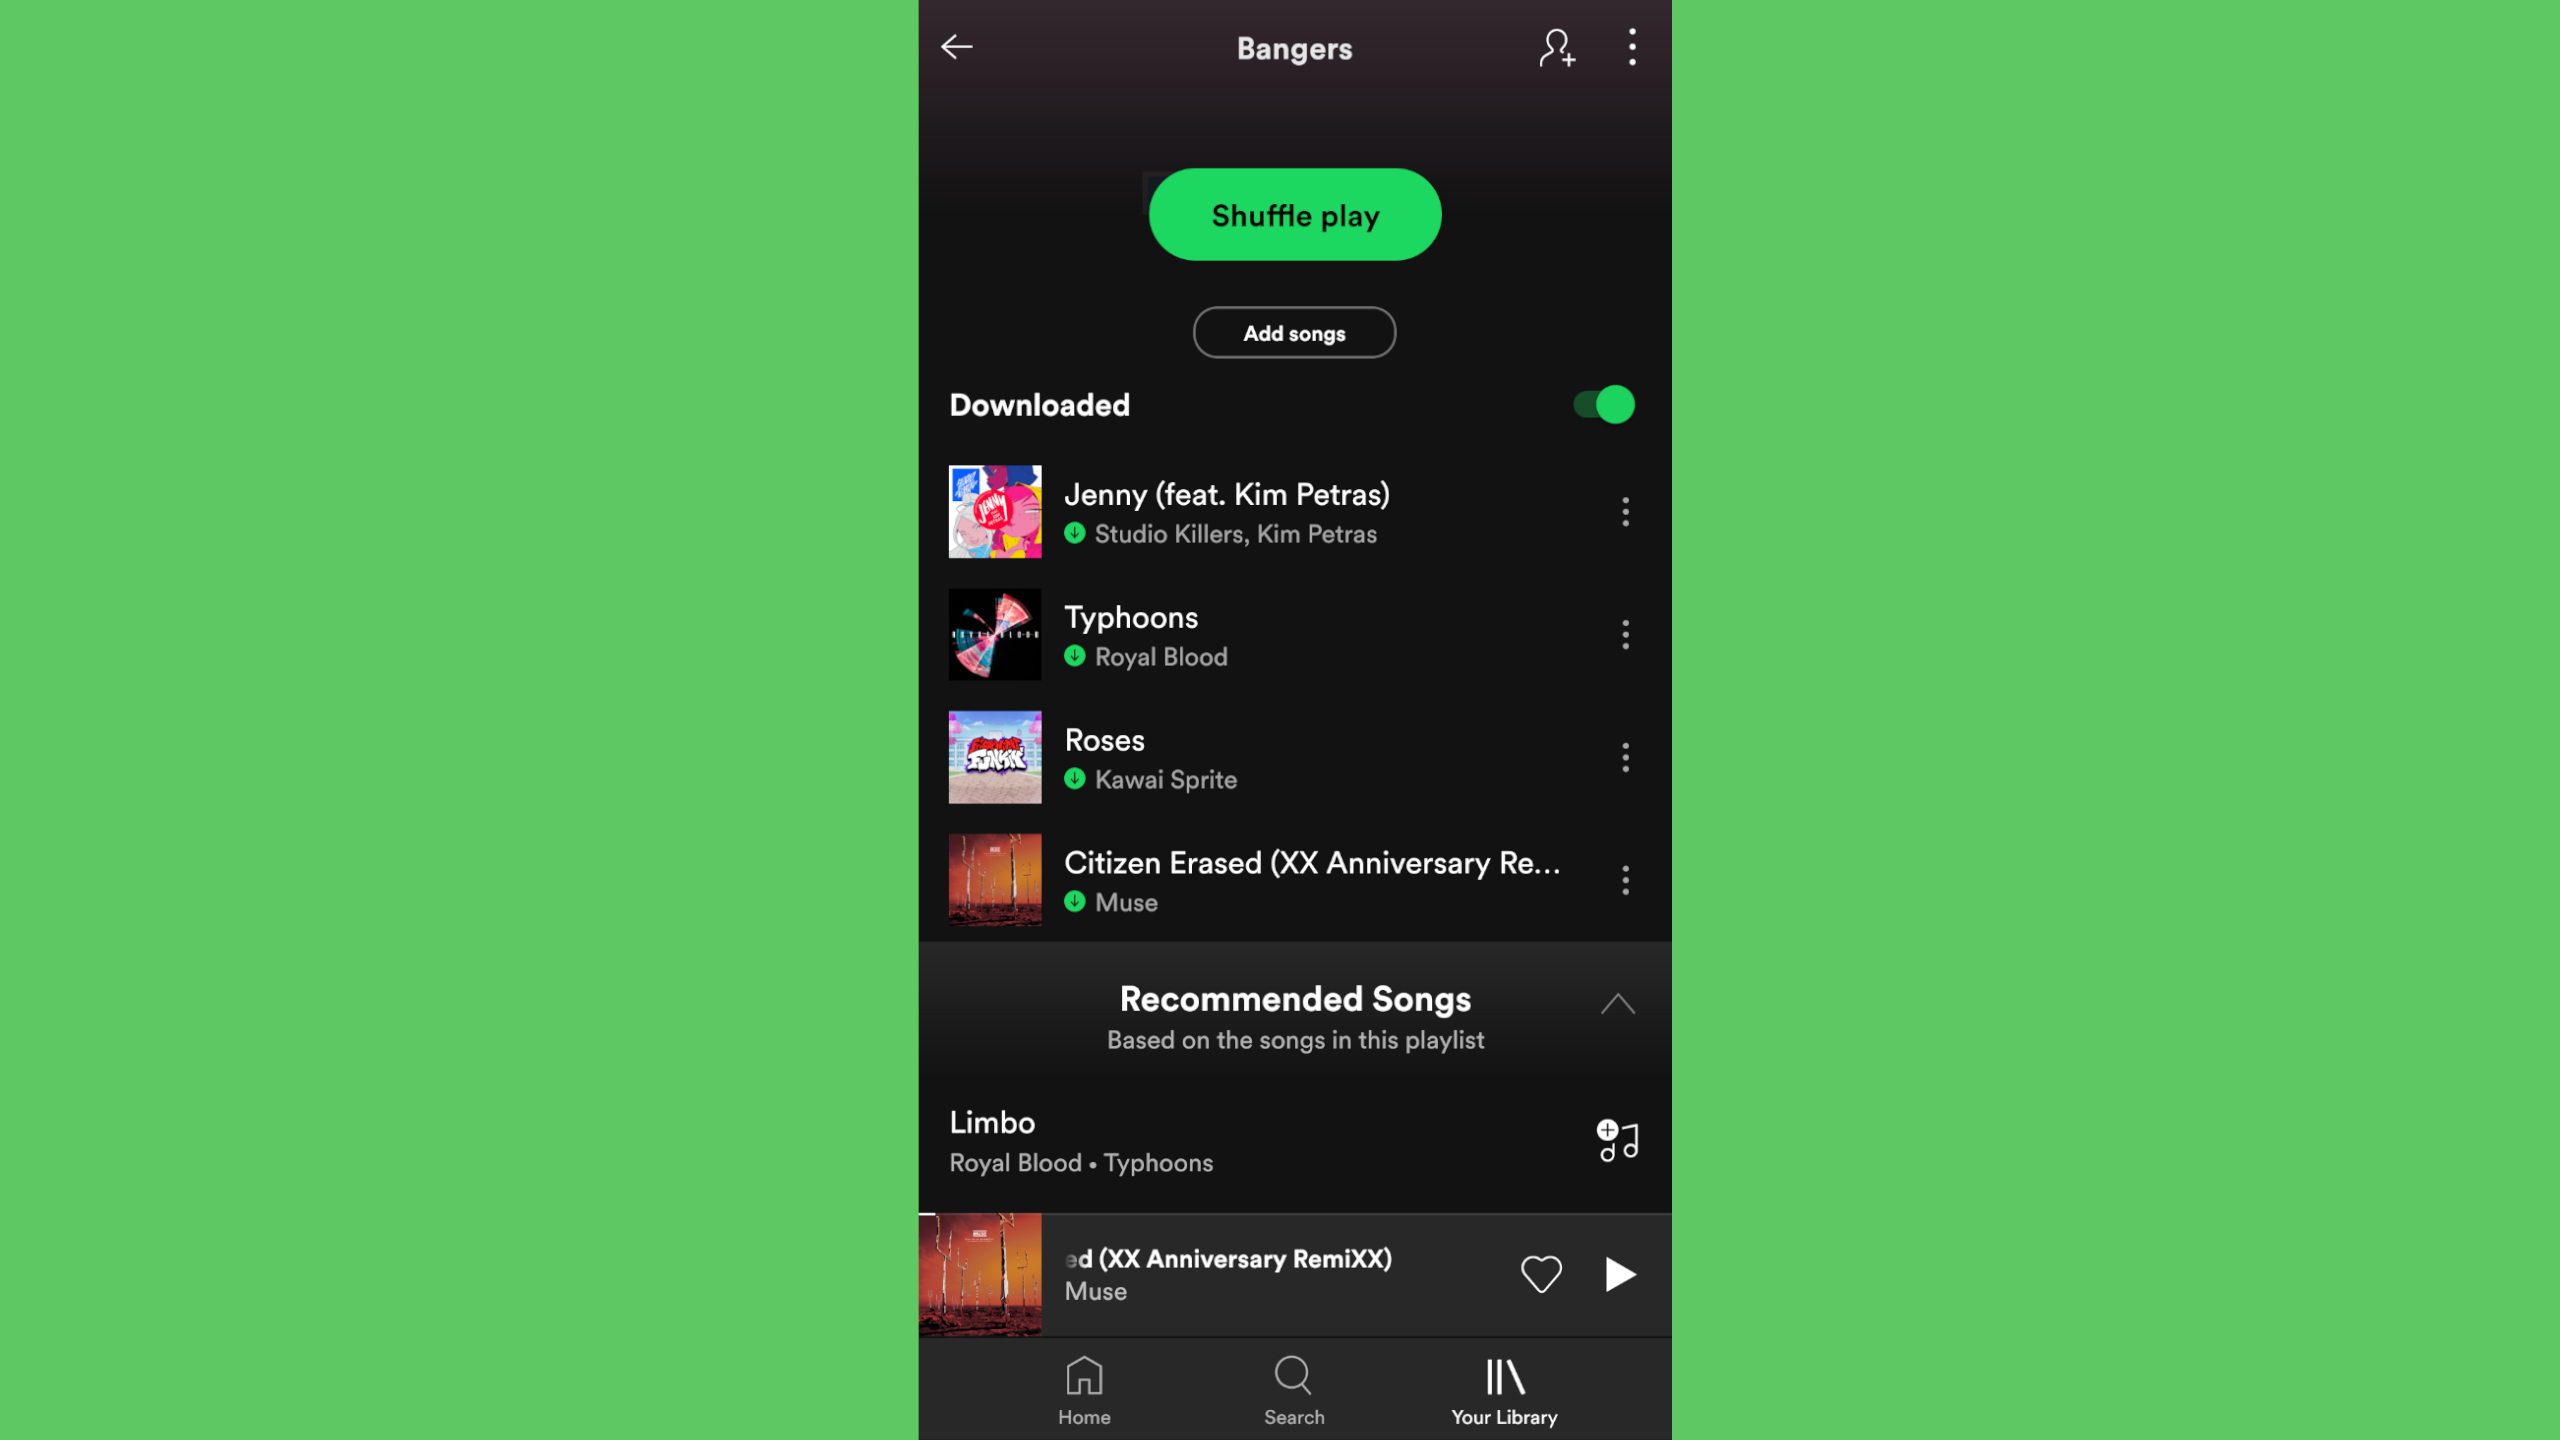 How to Download Songs to Spotify Step 3: Play Downloaded Songs from Your Library